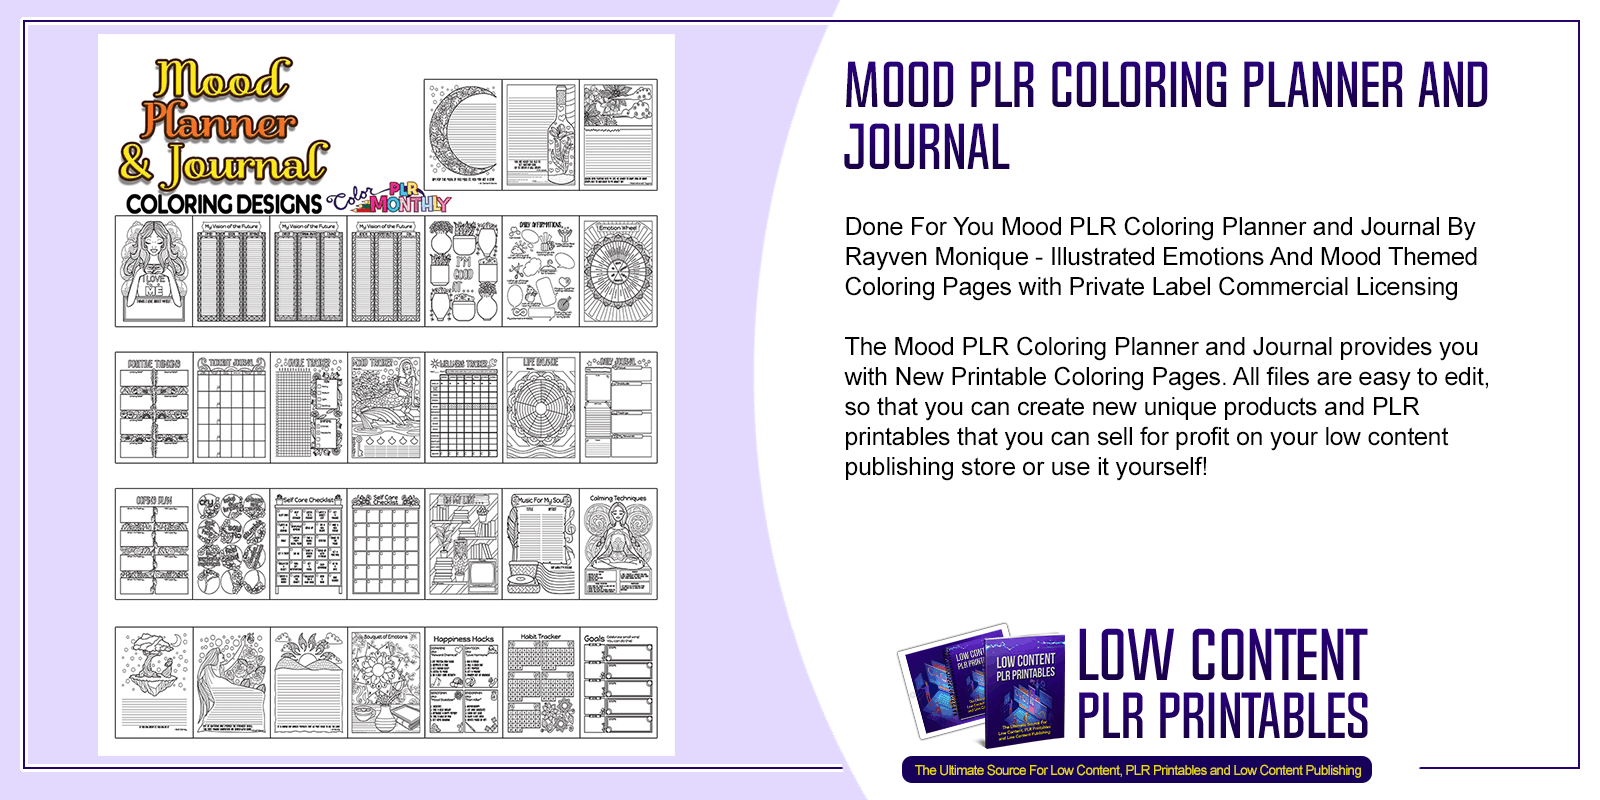 Mood PLR Coloring Planner and Journal